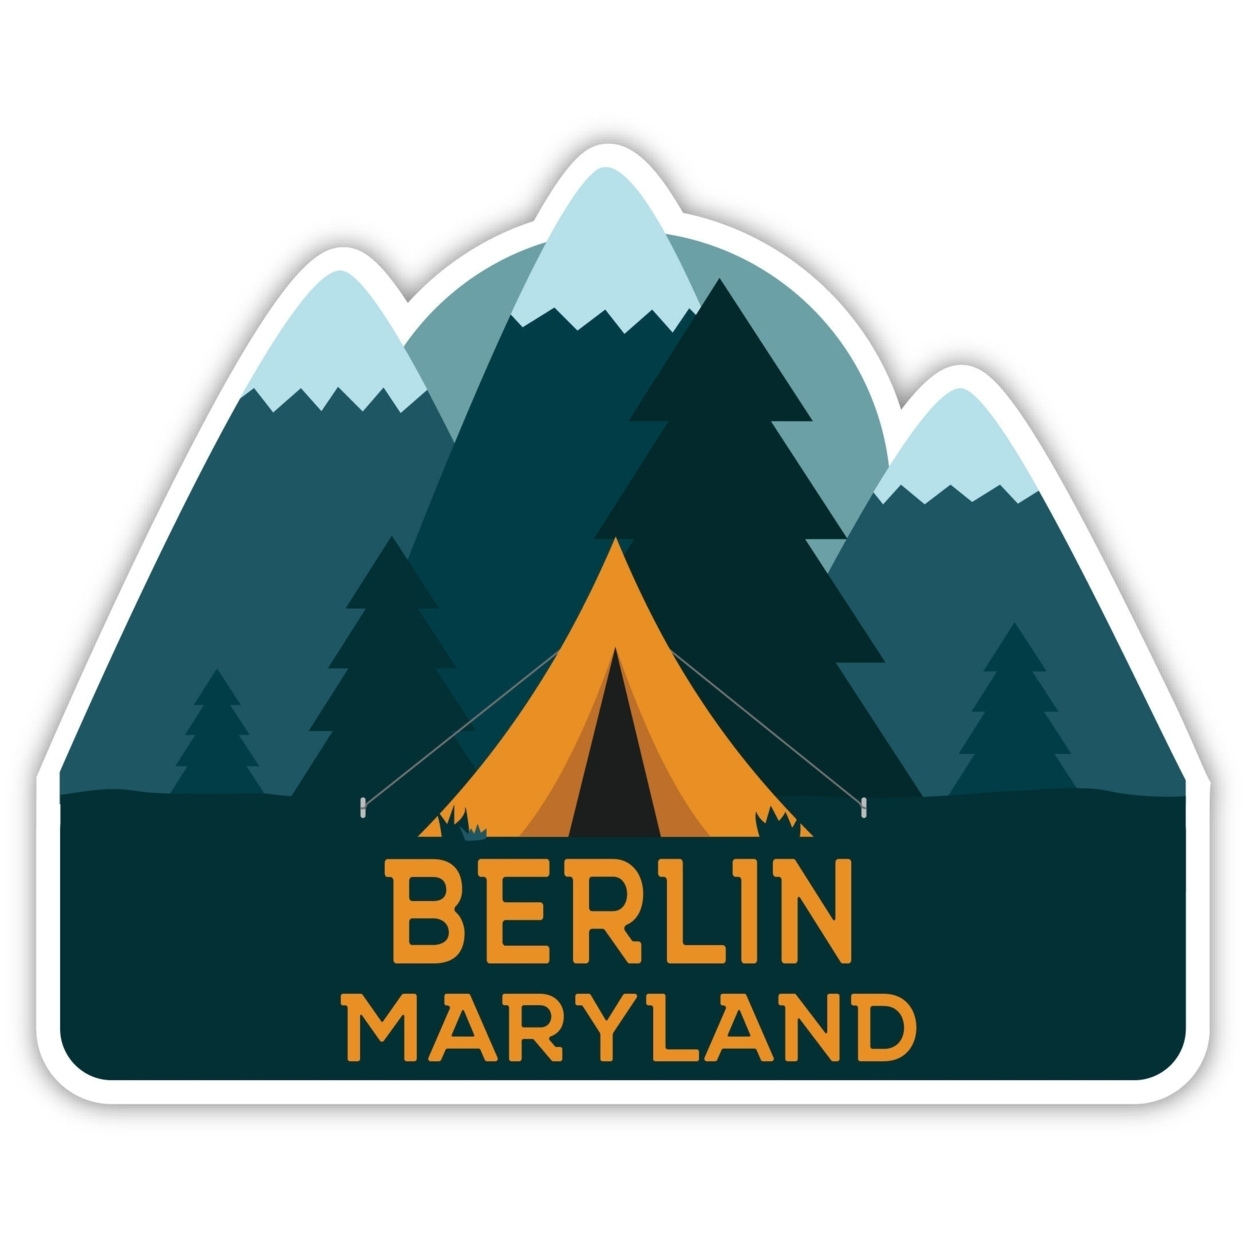 Berlin Maryland Souvenir Decorative Stickers (Choose Theme And Size) - 4-Pack, 2-Inch, Tent